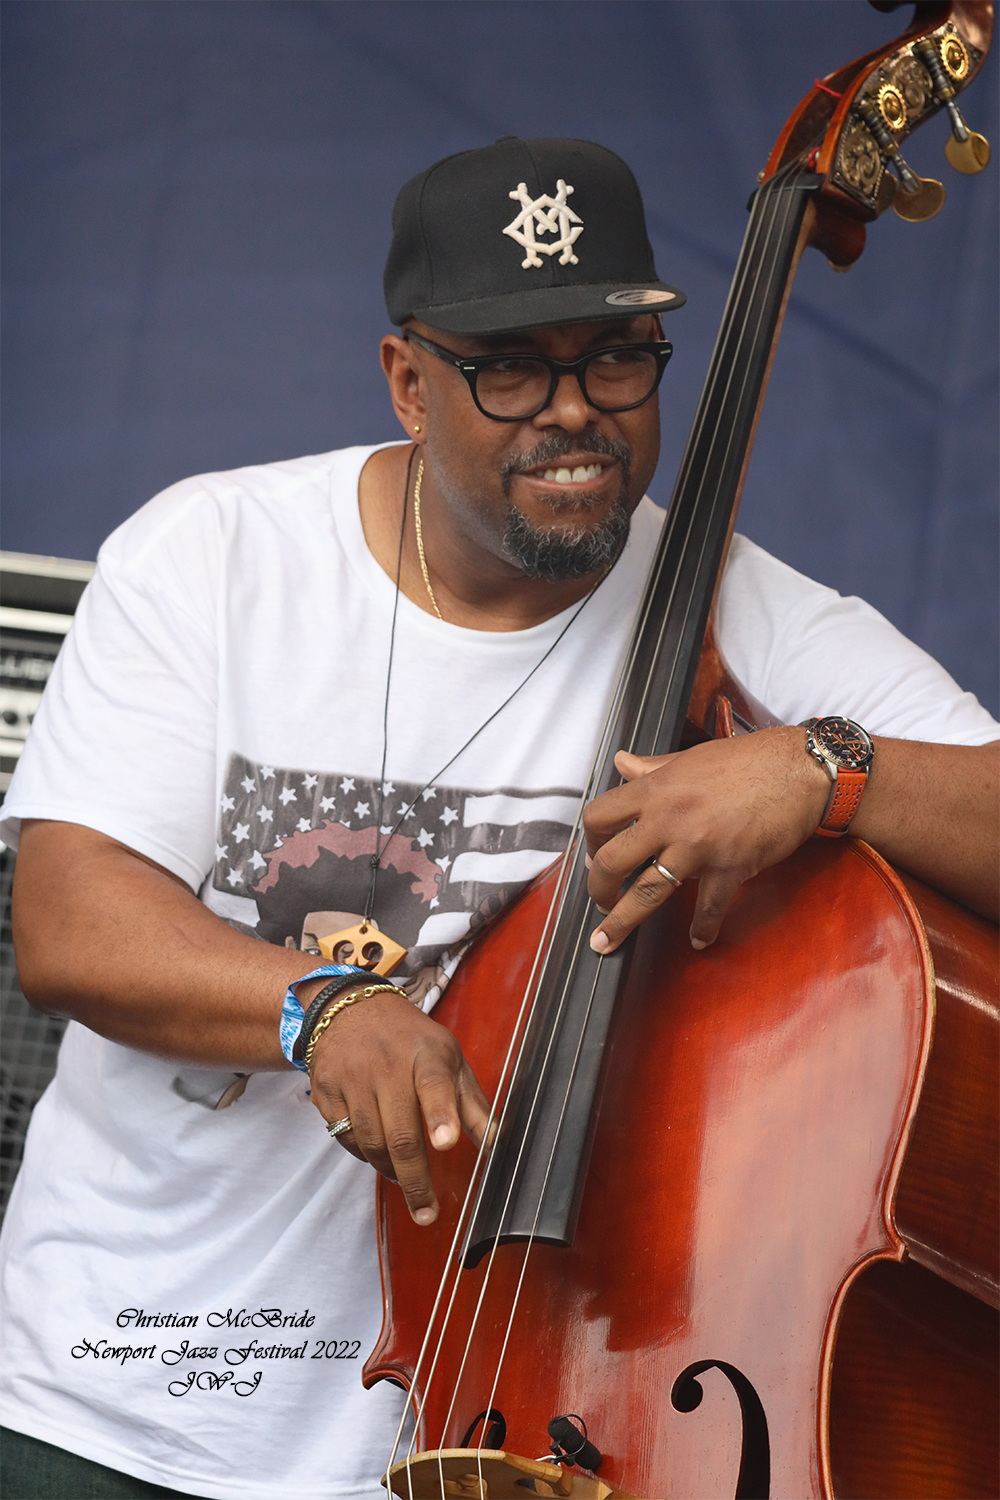 Full color shot of Christian Mc Bride on stage at the 2022 Newport Jazz Festival in Rhode Island